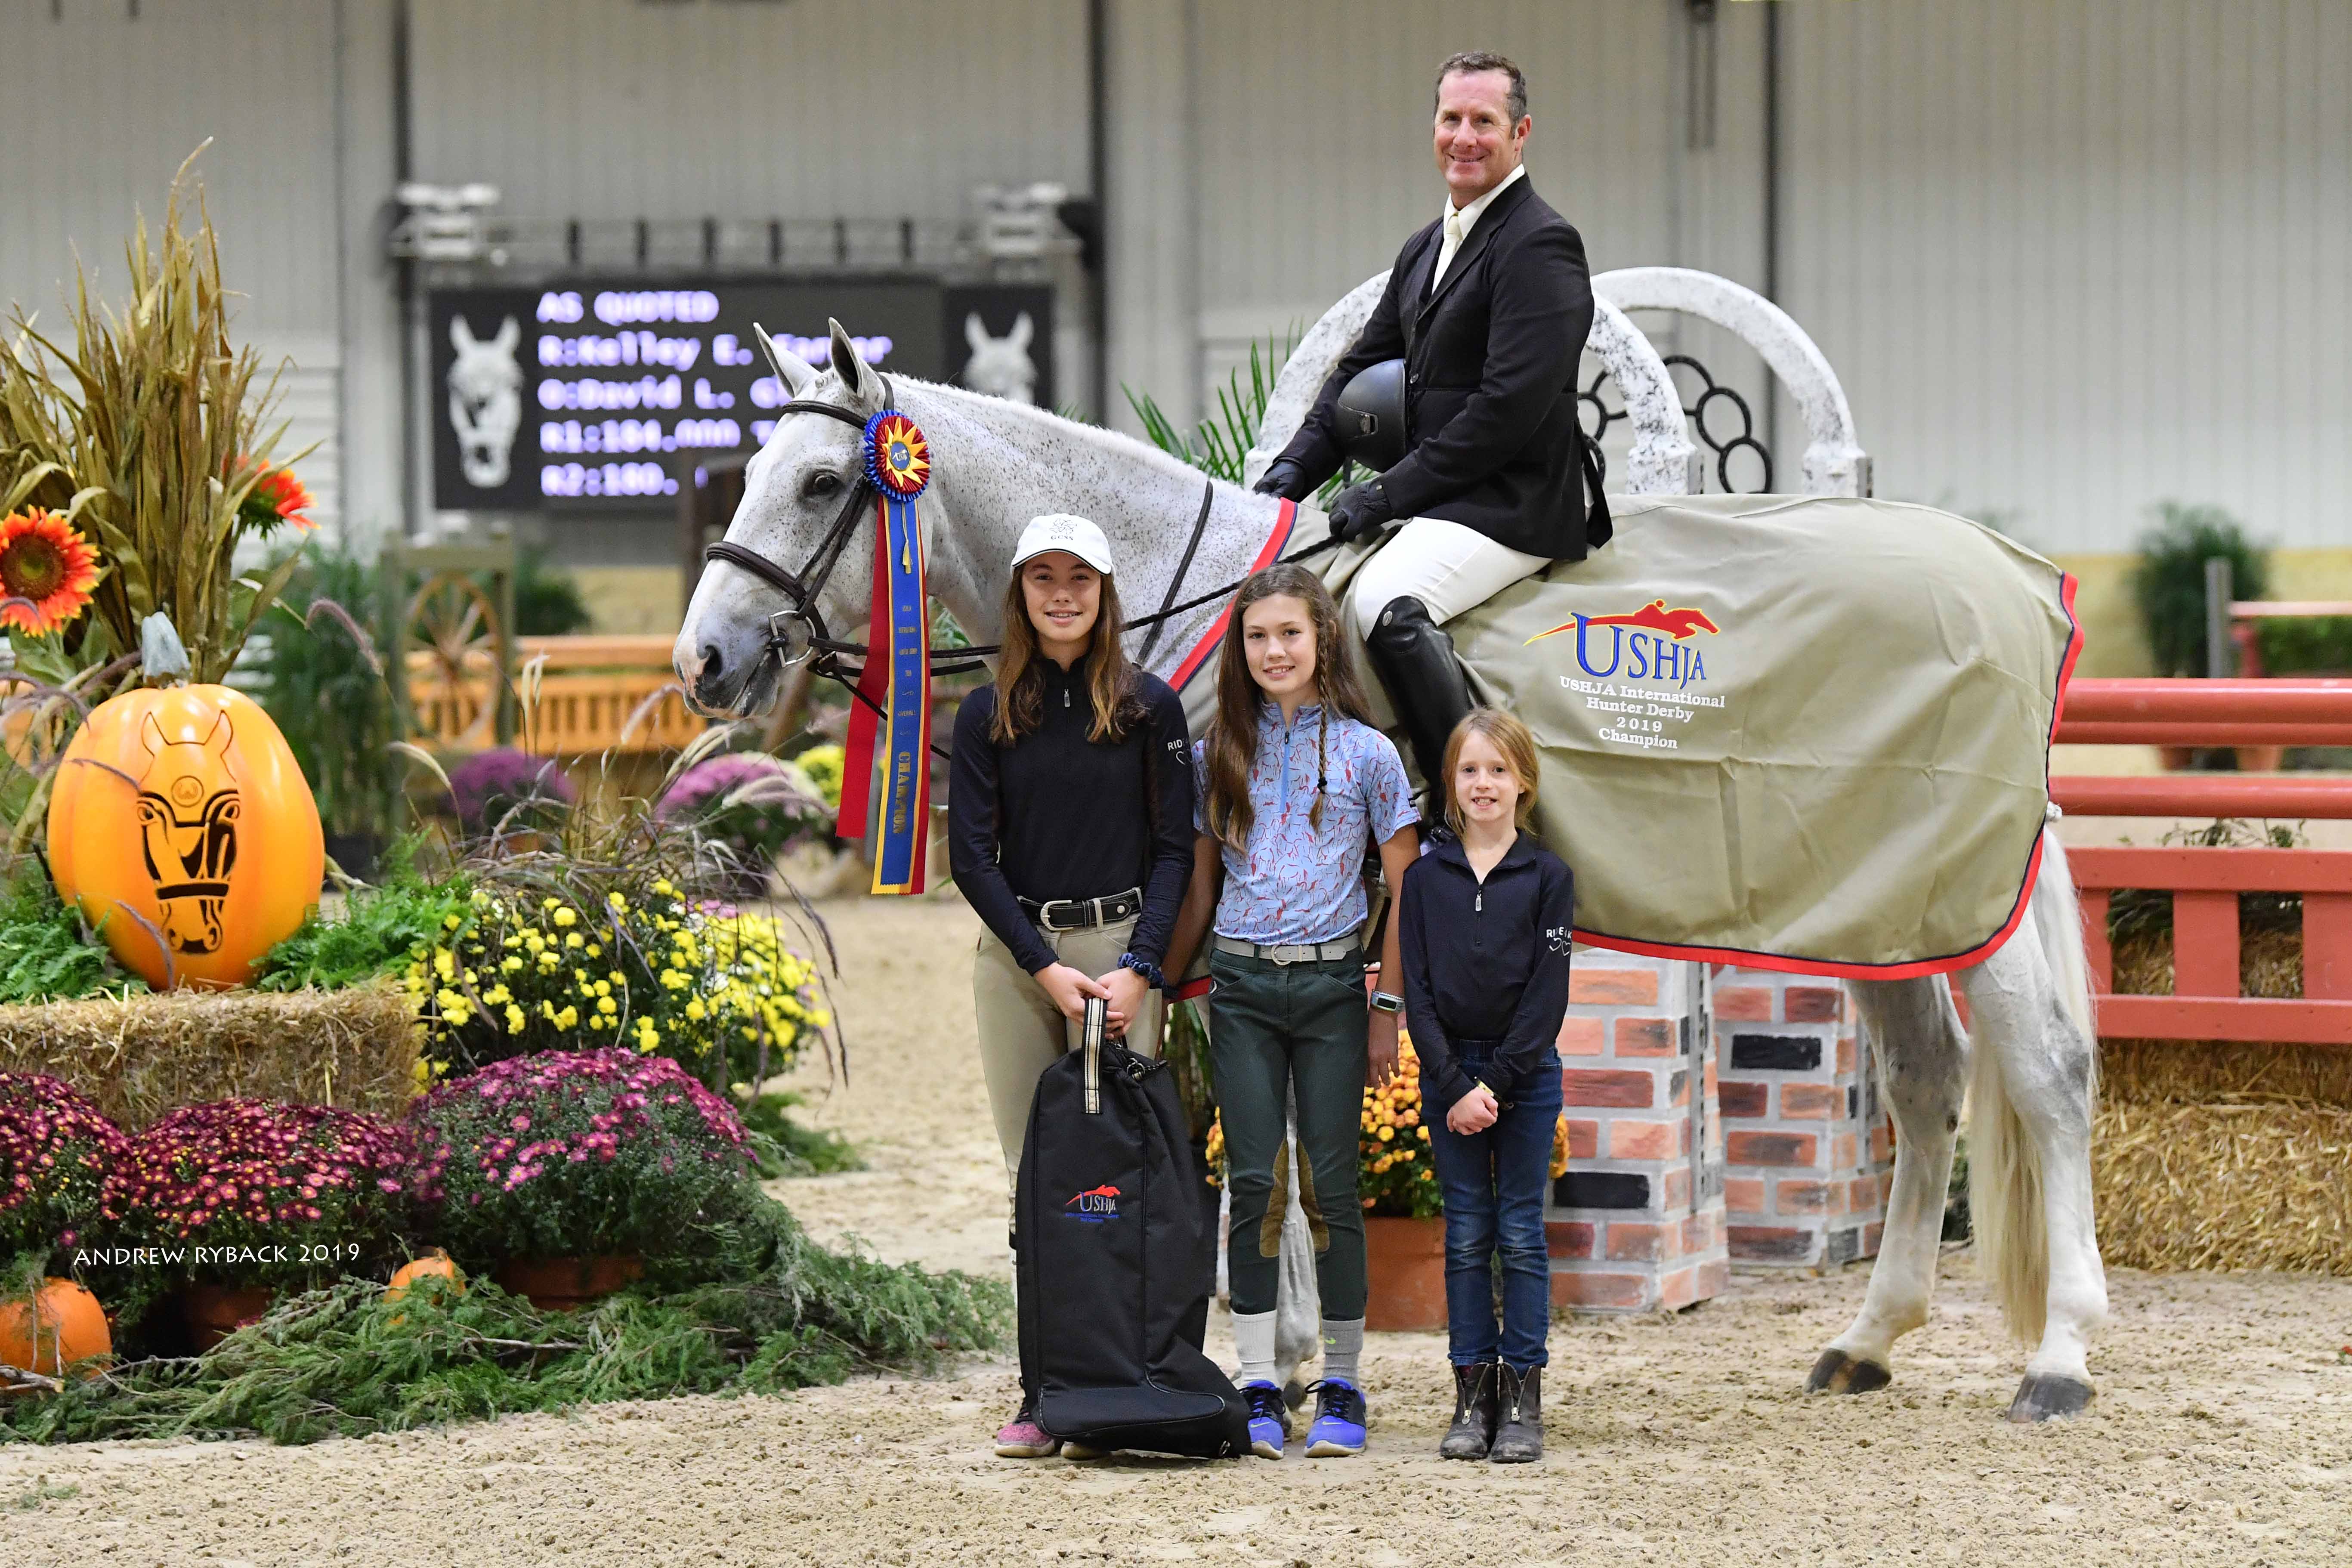 Greg Crolick and World USHJA Take $40,000 Hunter Honors Equestrian the - in Z International Center Top Derby Corallo